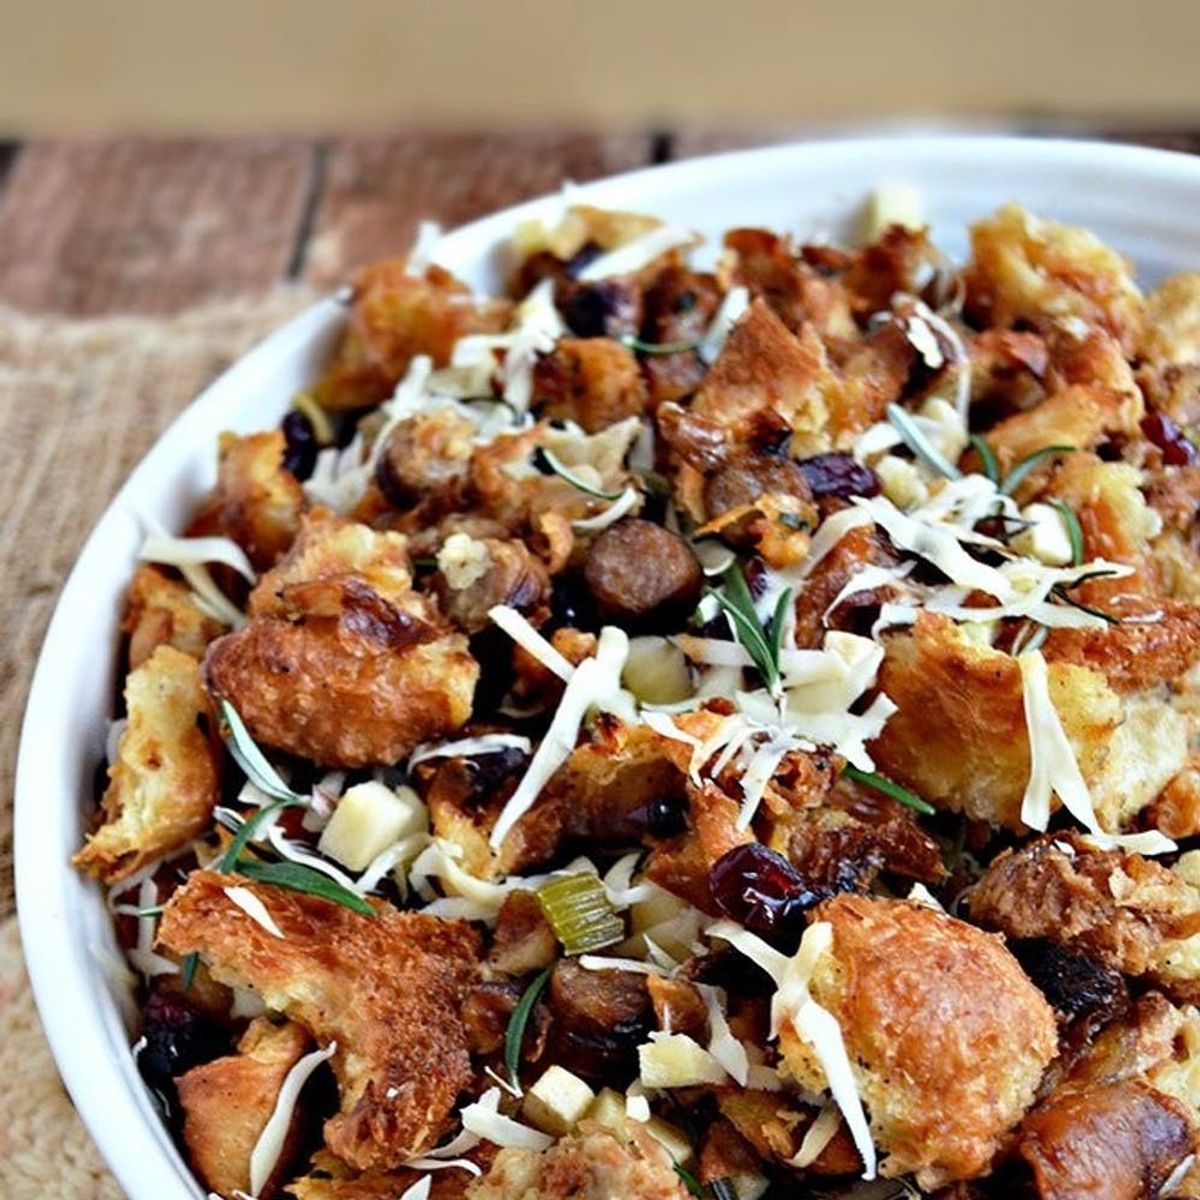 20 Scrumptious Stuffing Recipes That Go Beyond the Box - Brit + Co